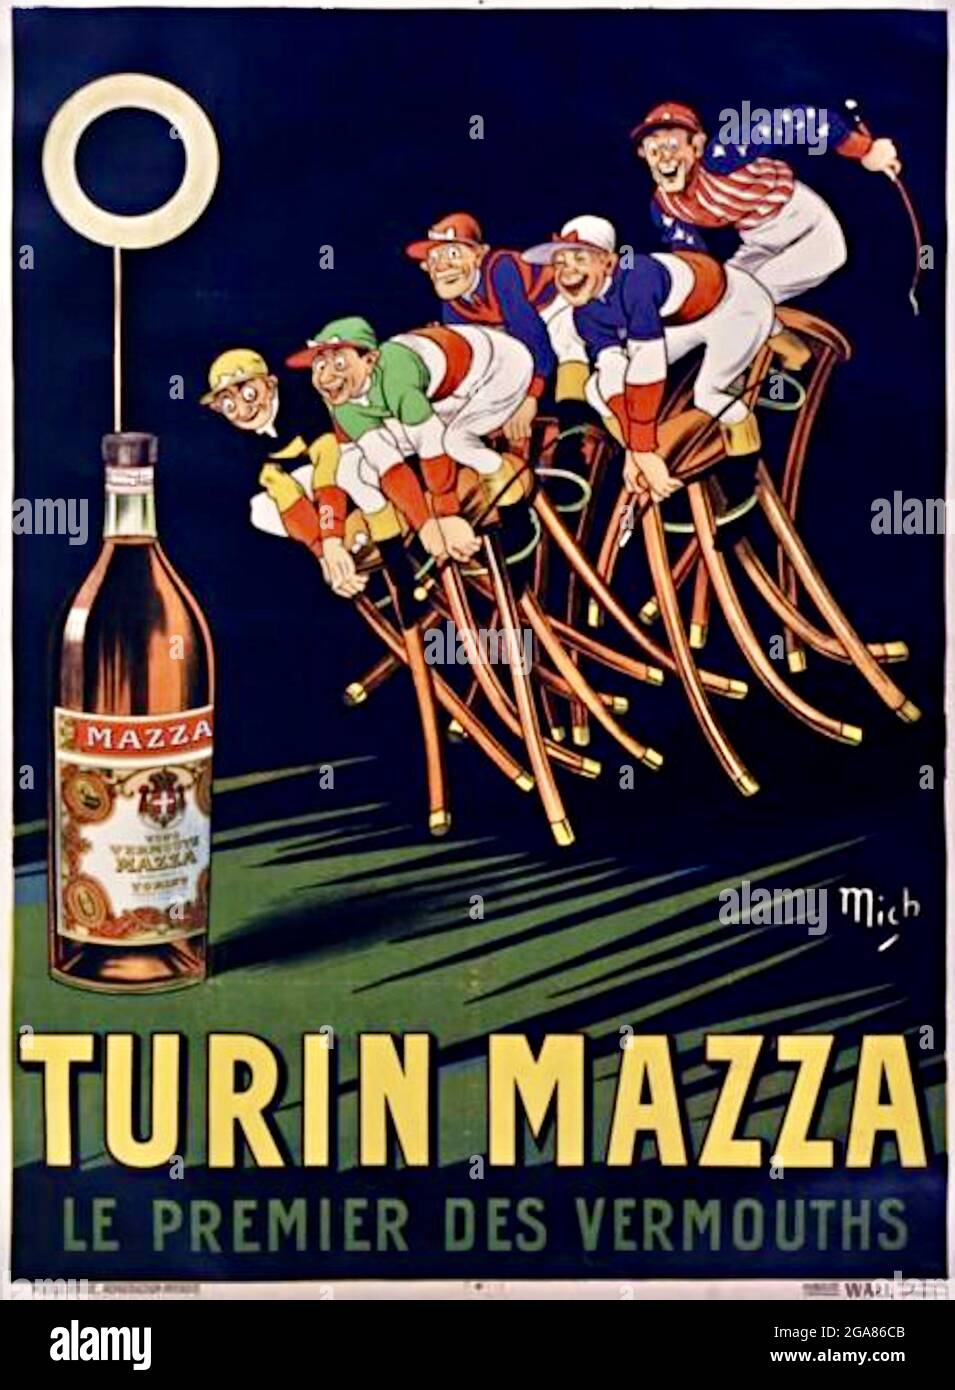 Advertising poster for Turin Mazza Vermouth, by Mich otherwise known as Jean -Marie-Michel Liébaux. Bar stool jockeys race fro a bottle of Turin Mazza  Stock Photo - Alamy